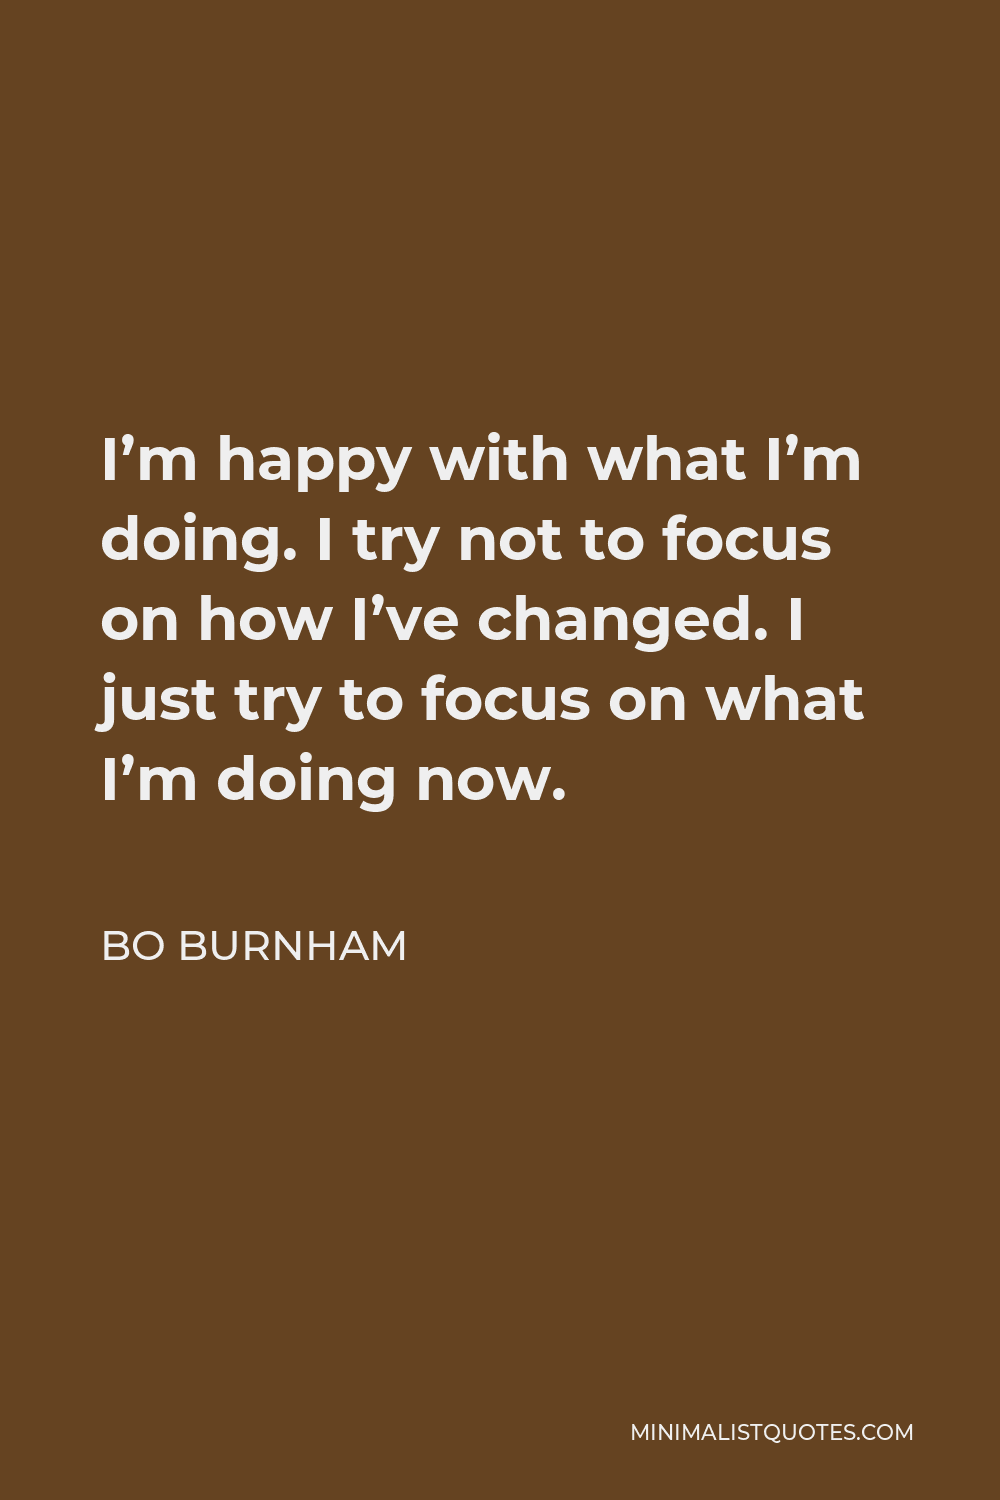 Bo Burnham Quote - I’m happy with what I’m doing. I try not to focus on how I’ve changed. I just try to focus on what I’m doing now.